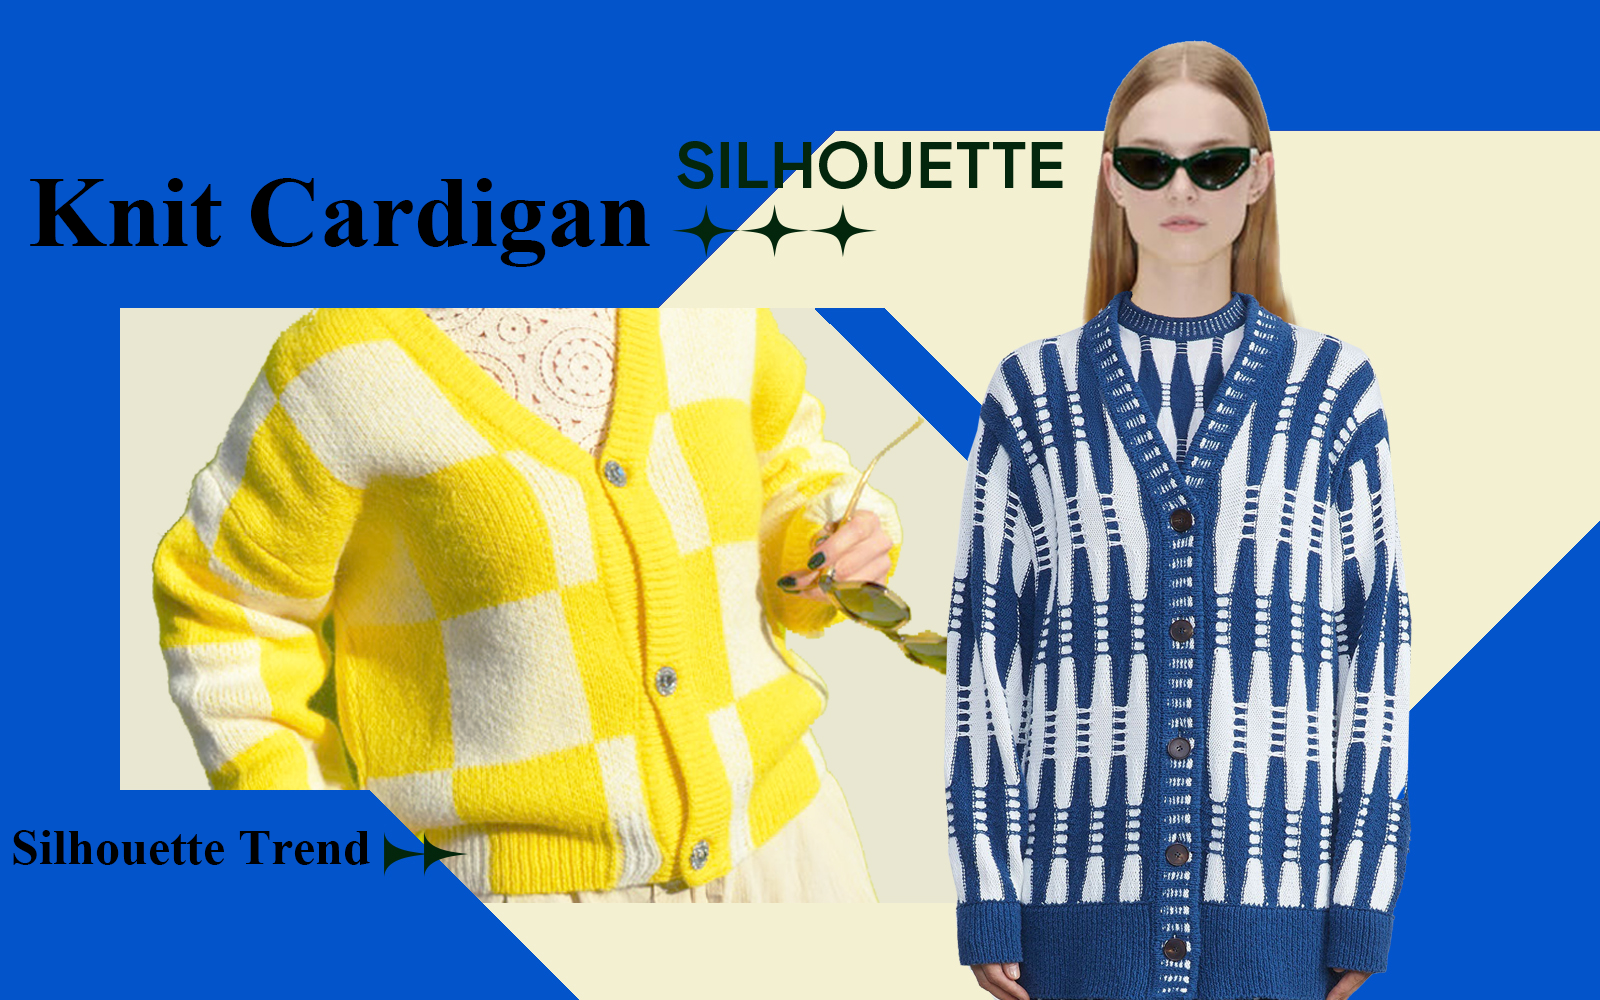 The A/W 24/25 Silhouette Trend for Women's Knit Cardigan